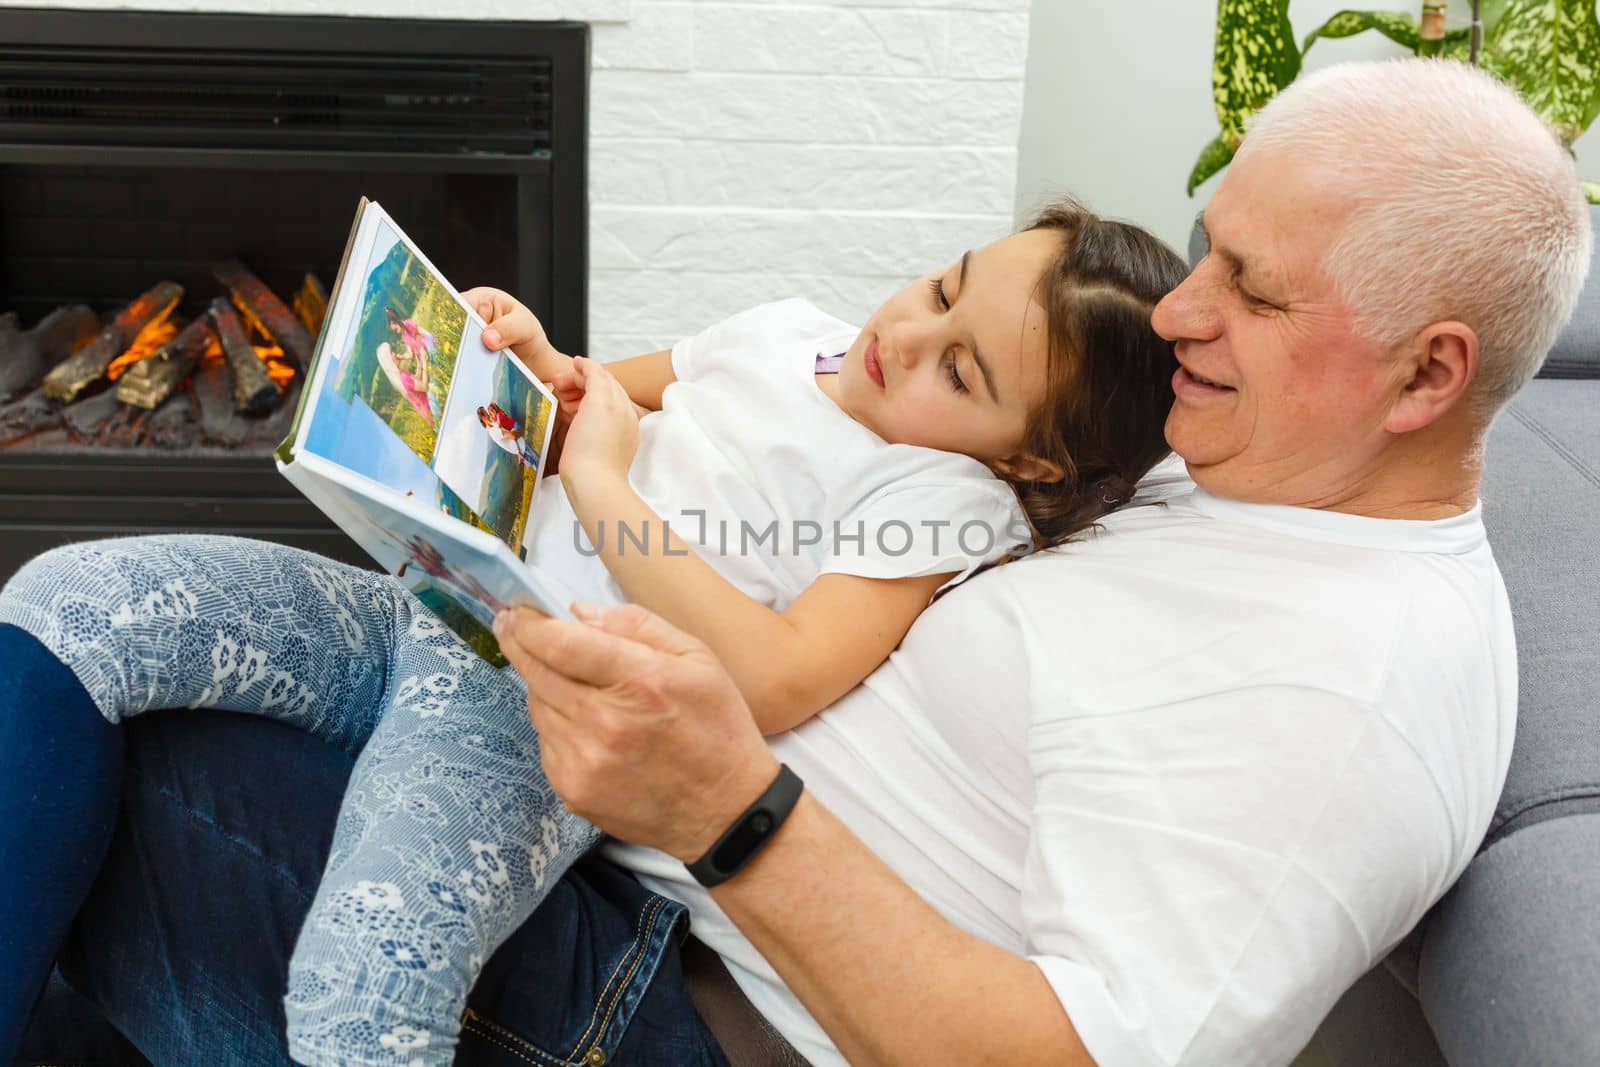 Grandfather And Granddaughter Looking Through Photo Album In Lounge At Home Together.